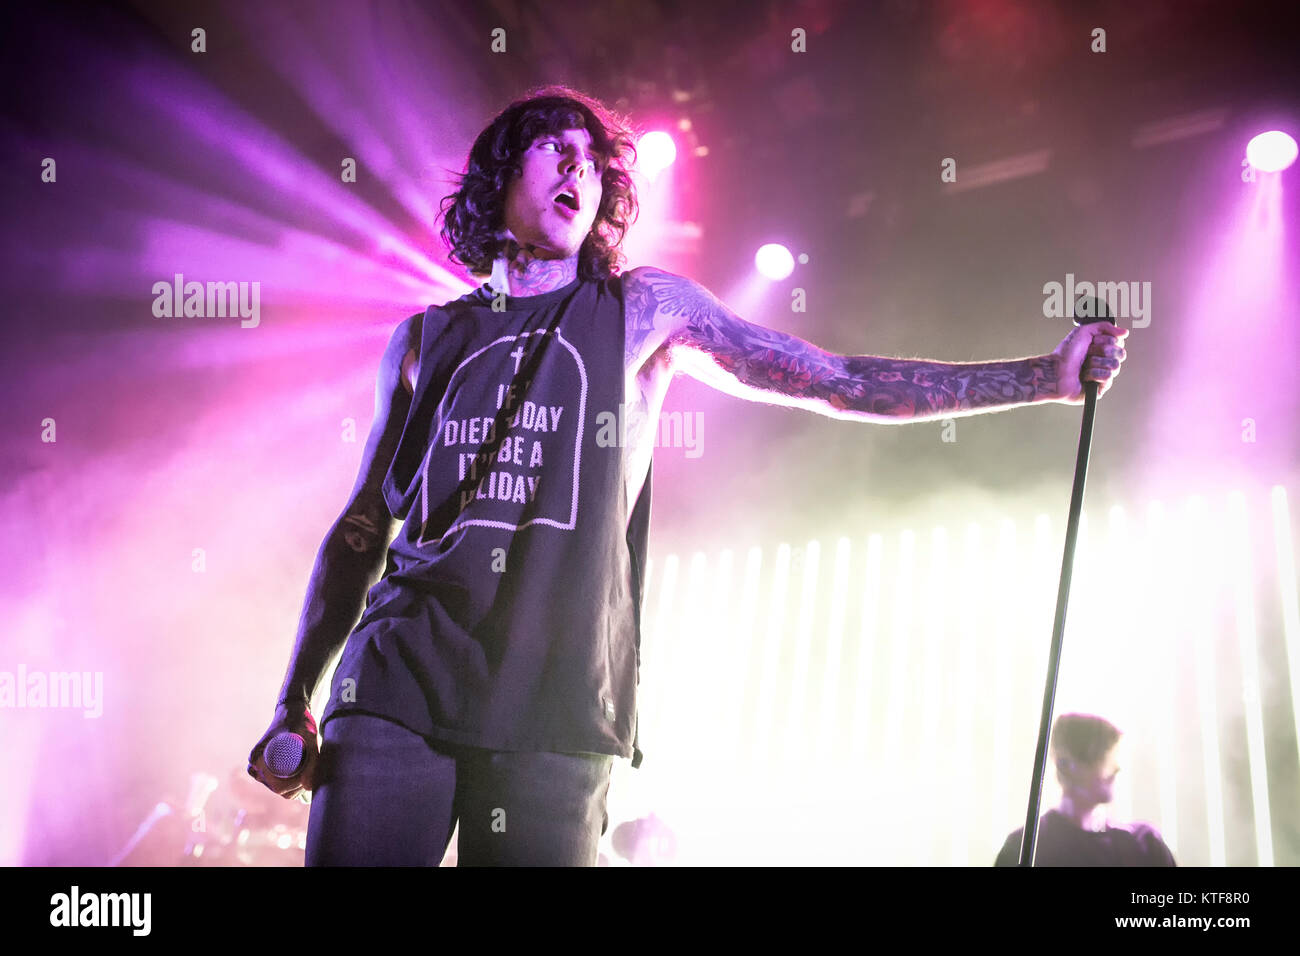 Bring Me The Horizon, the British metal core band, performs a live concert at Rockefeller in Oslo. Here vocalist Oliver Sykes is pictured live on stage. Norway, 13/11 2015. Stock Photo